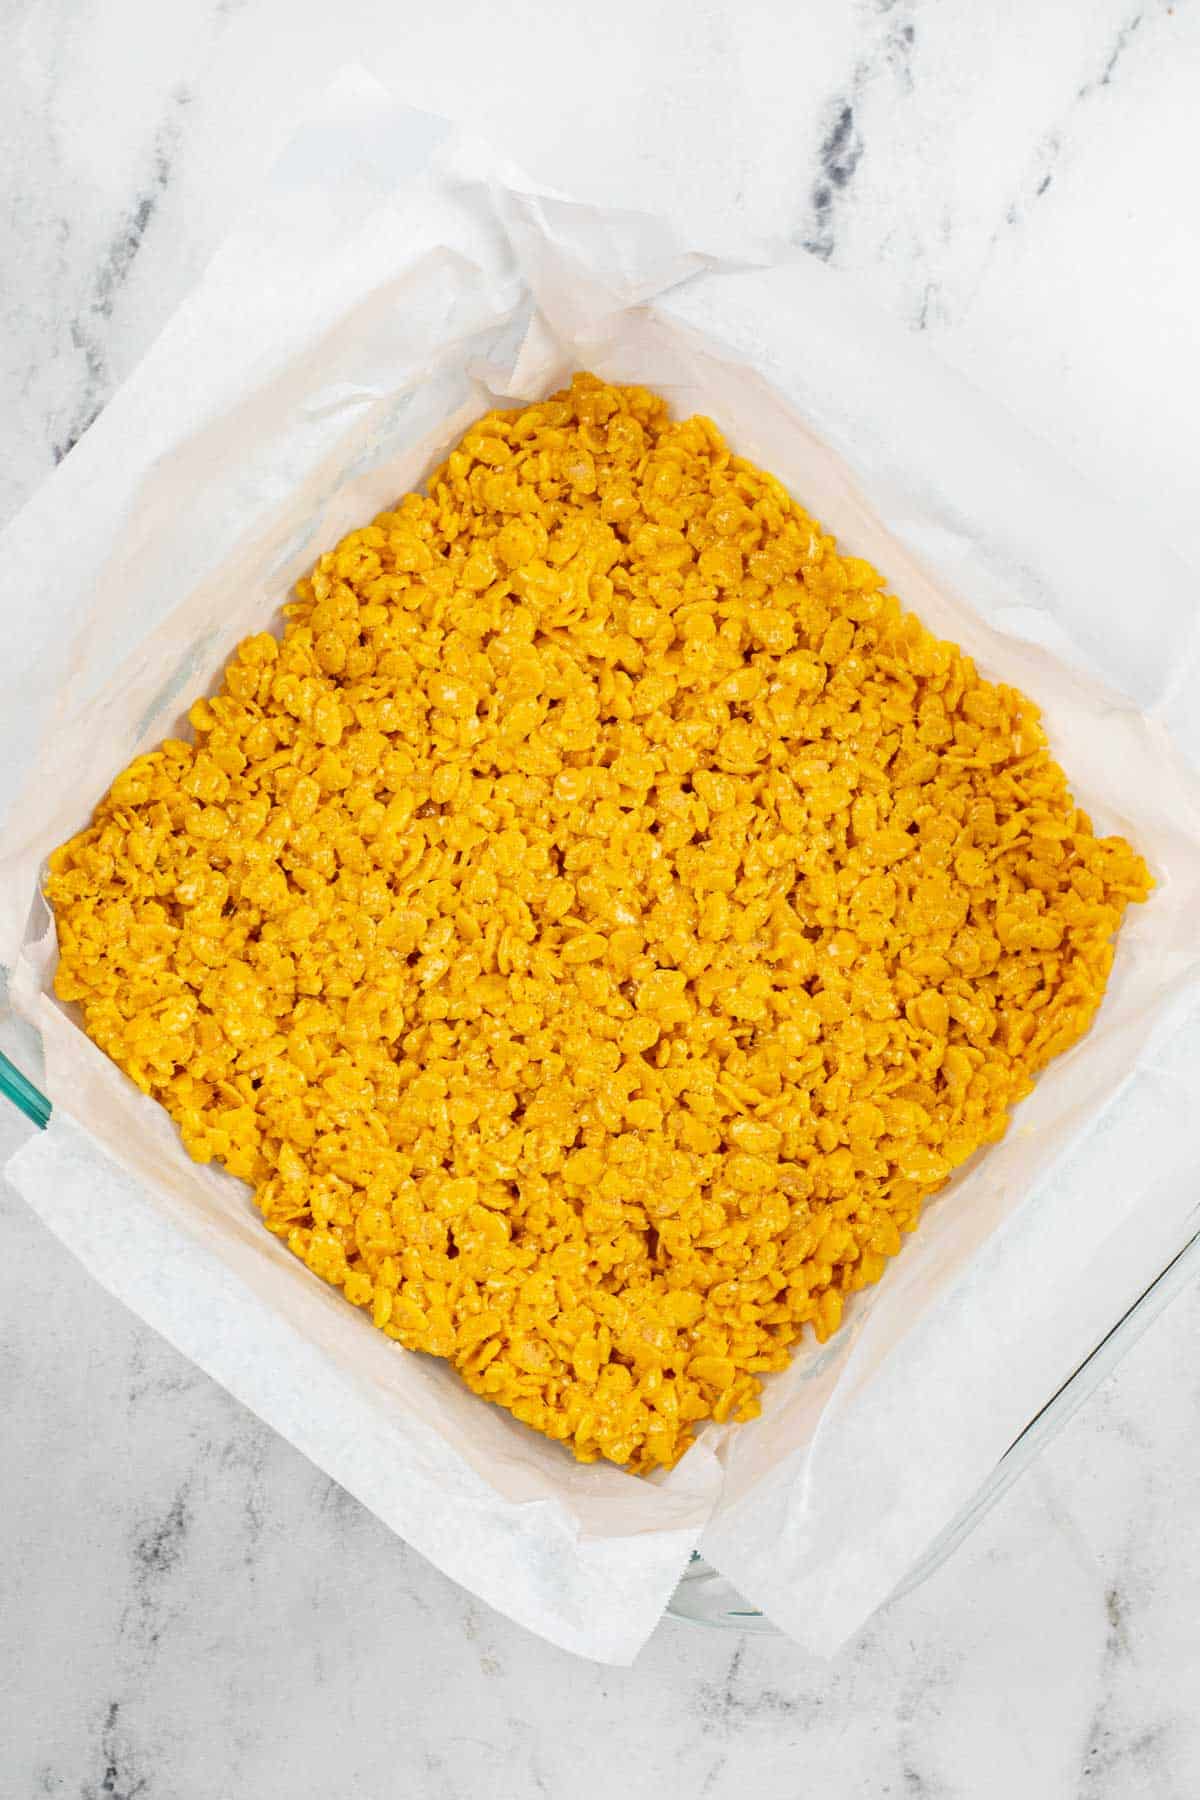 square glass dish with yellow colored rice krispie treats pressed down.